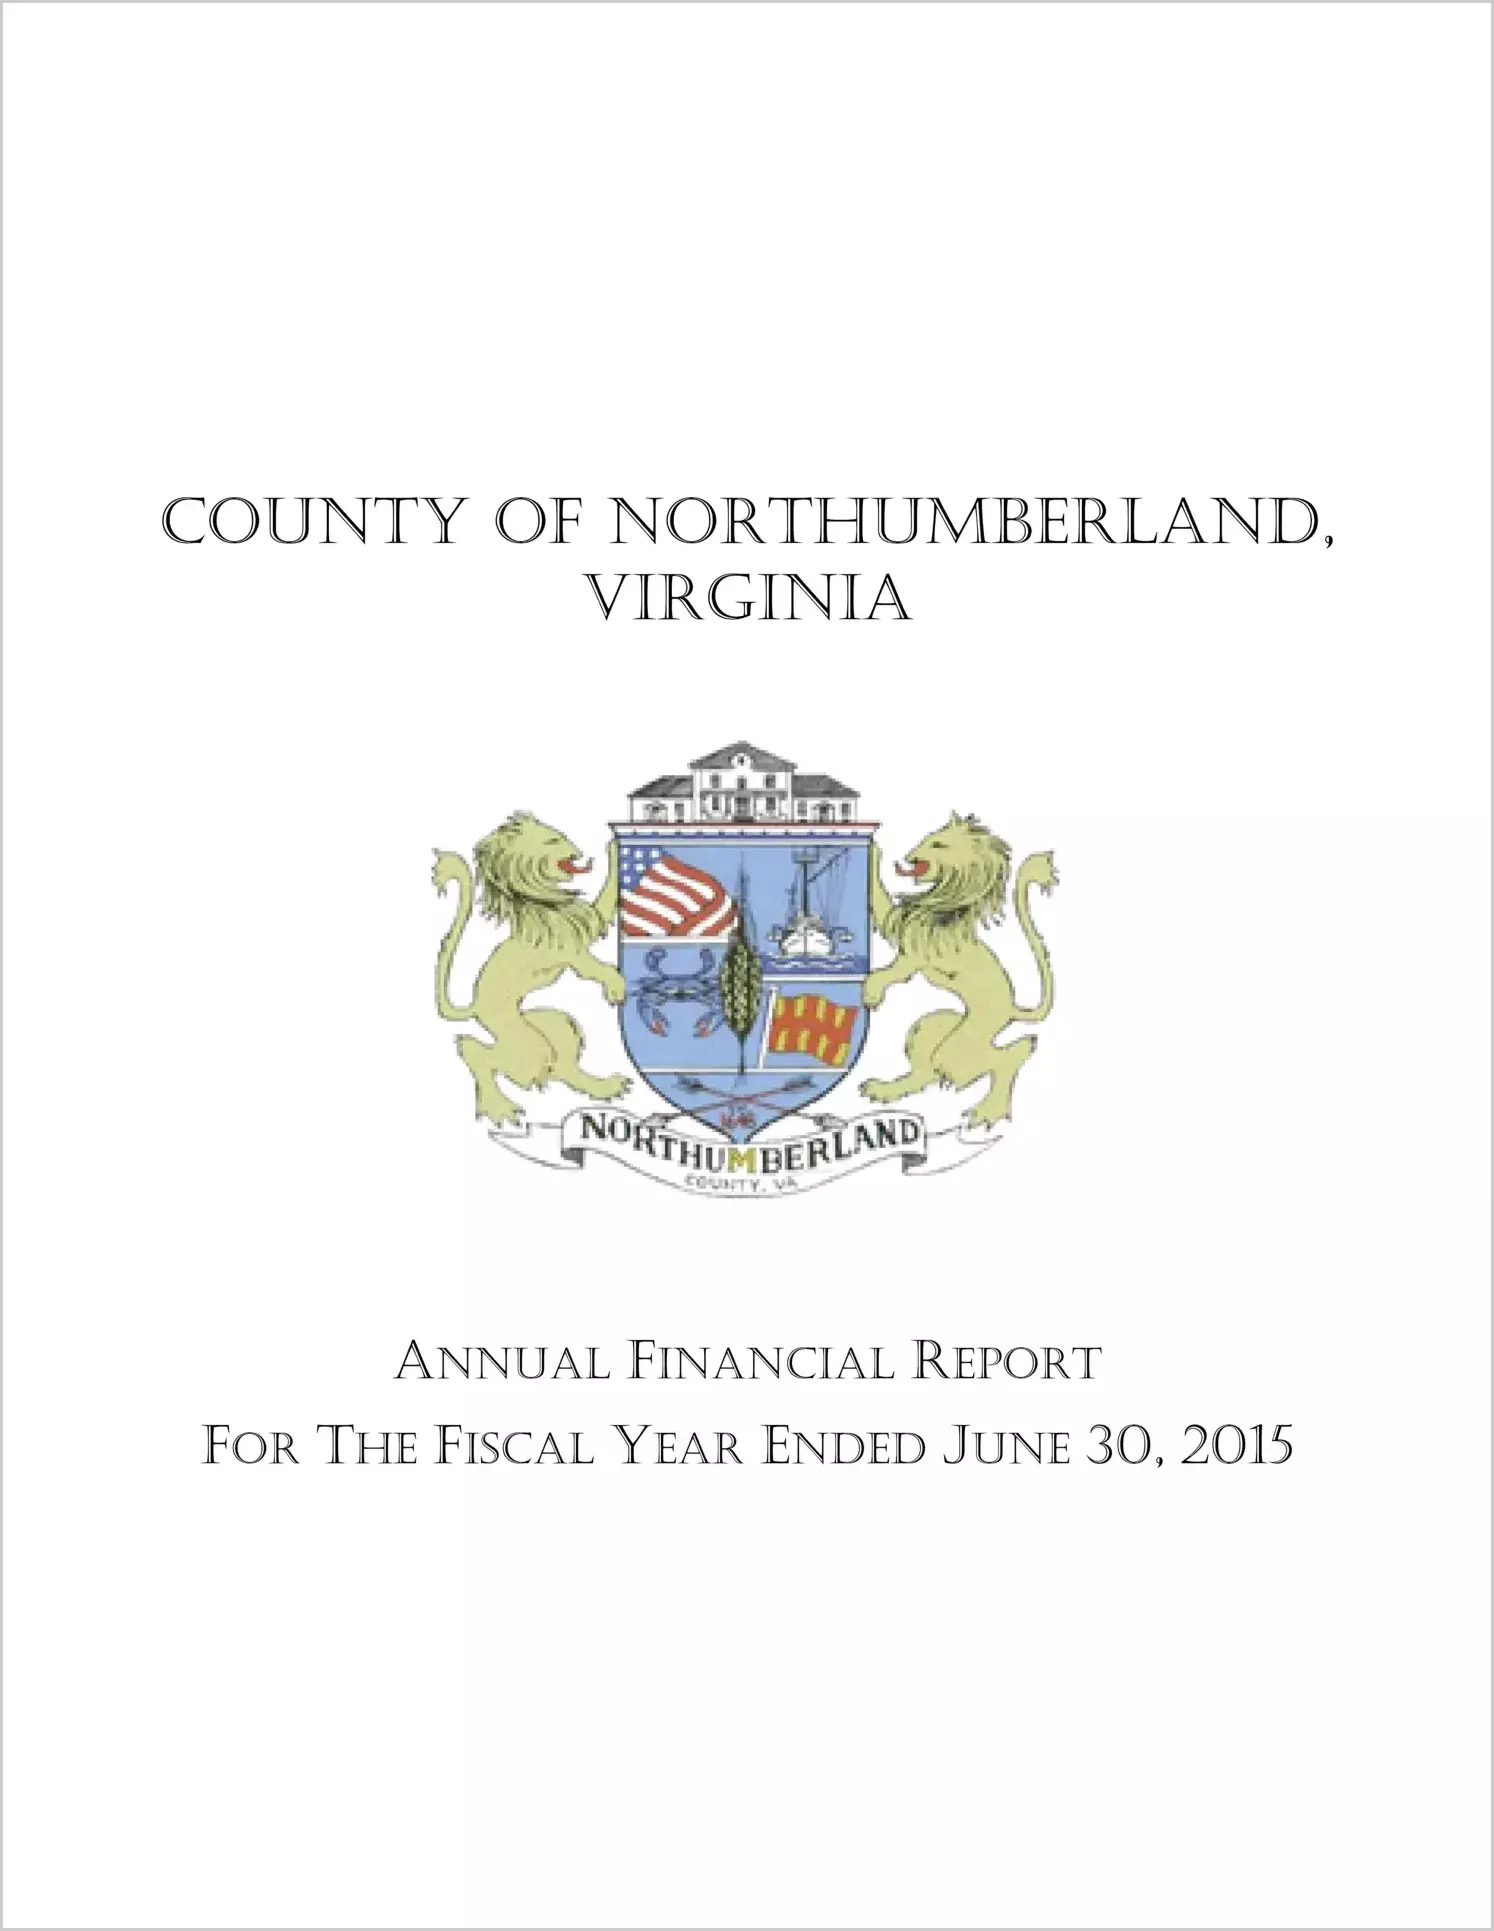 2015 Annual Financial Report for County of Northumberland